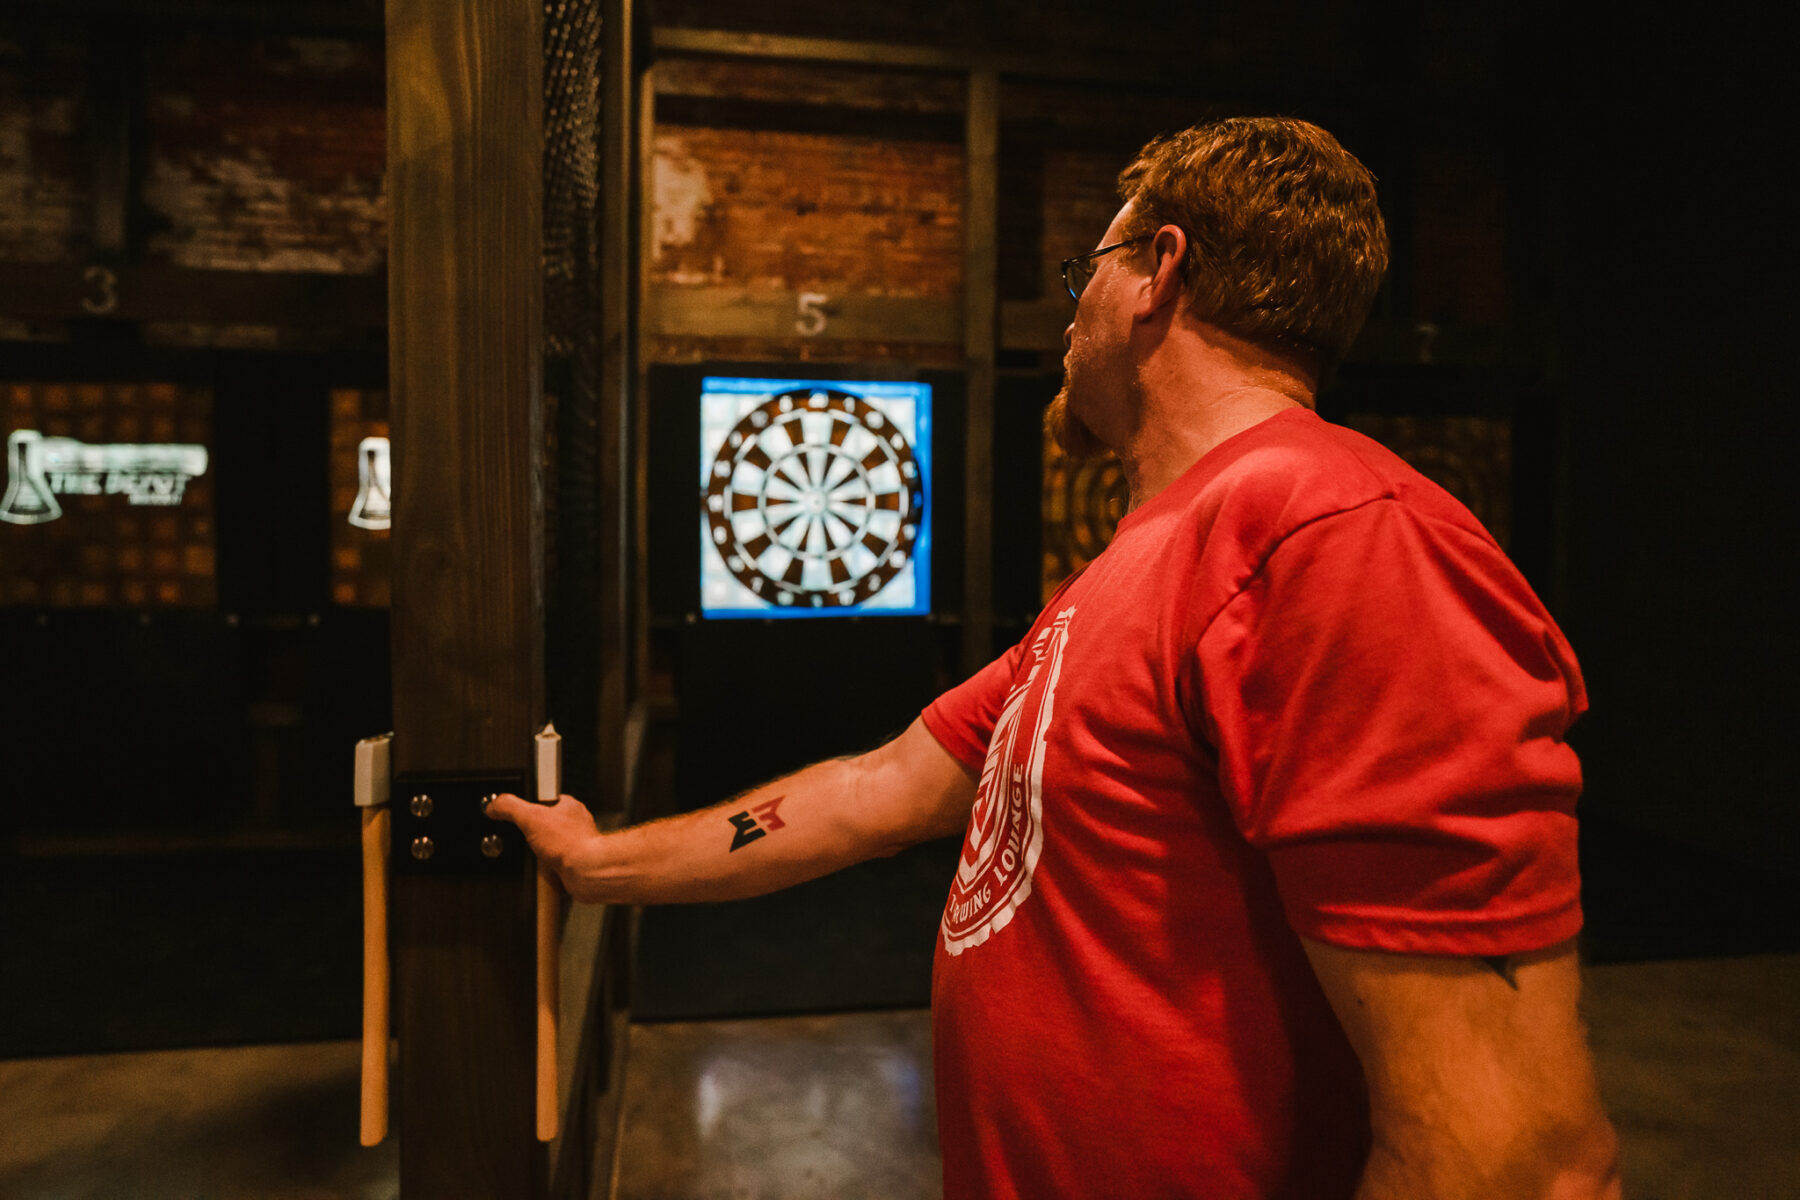 14 axe throwing lanes are available at the depot